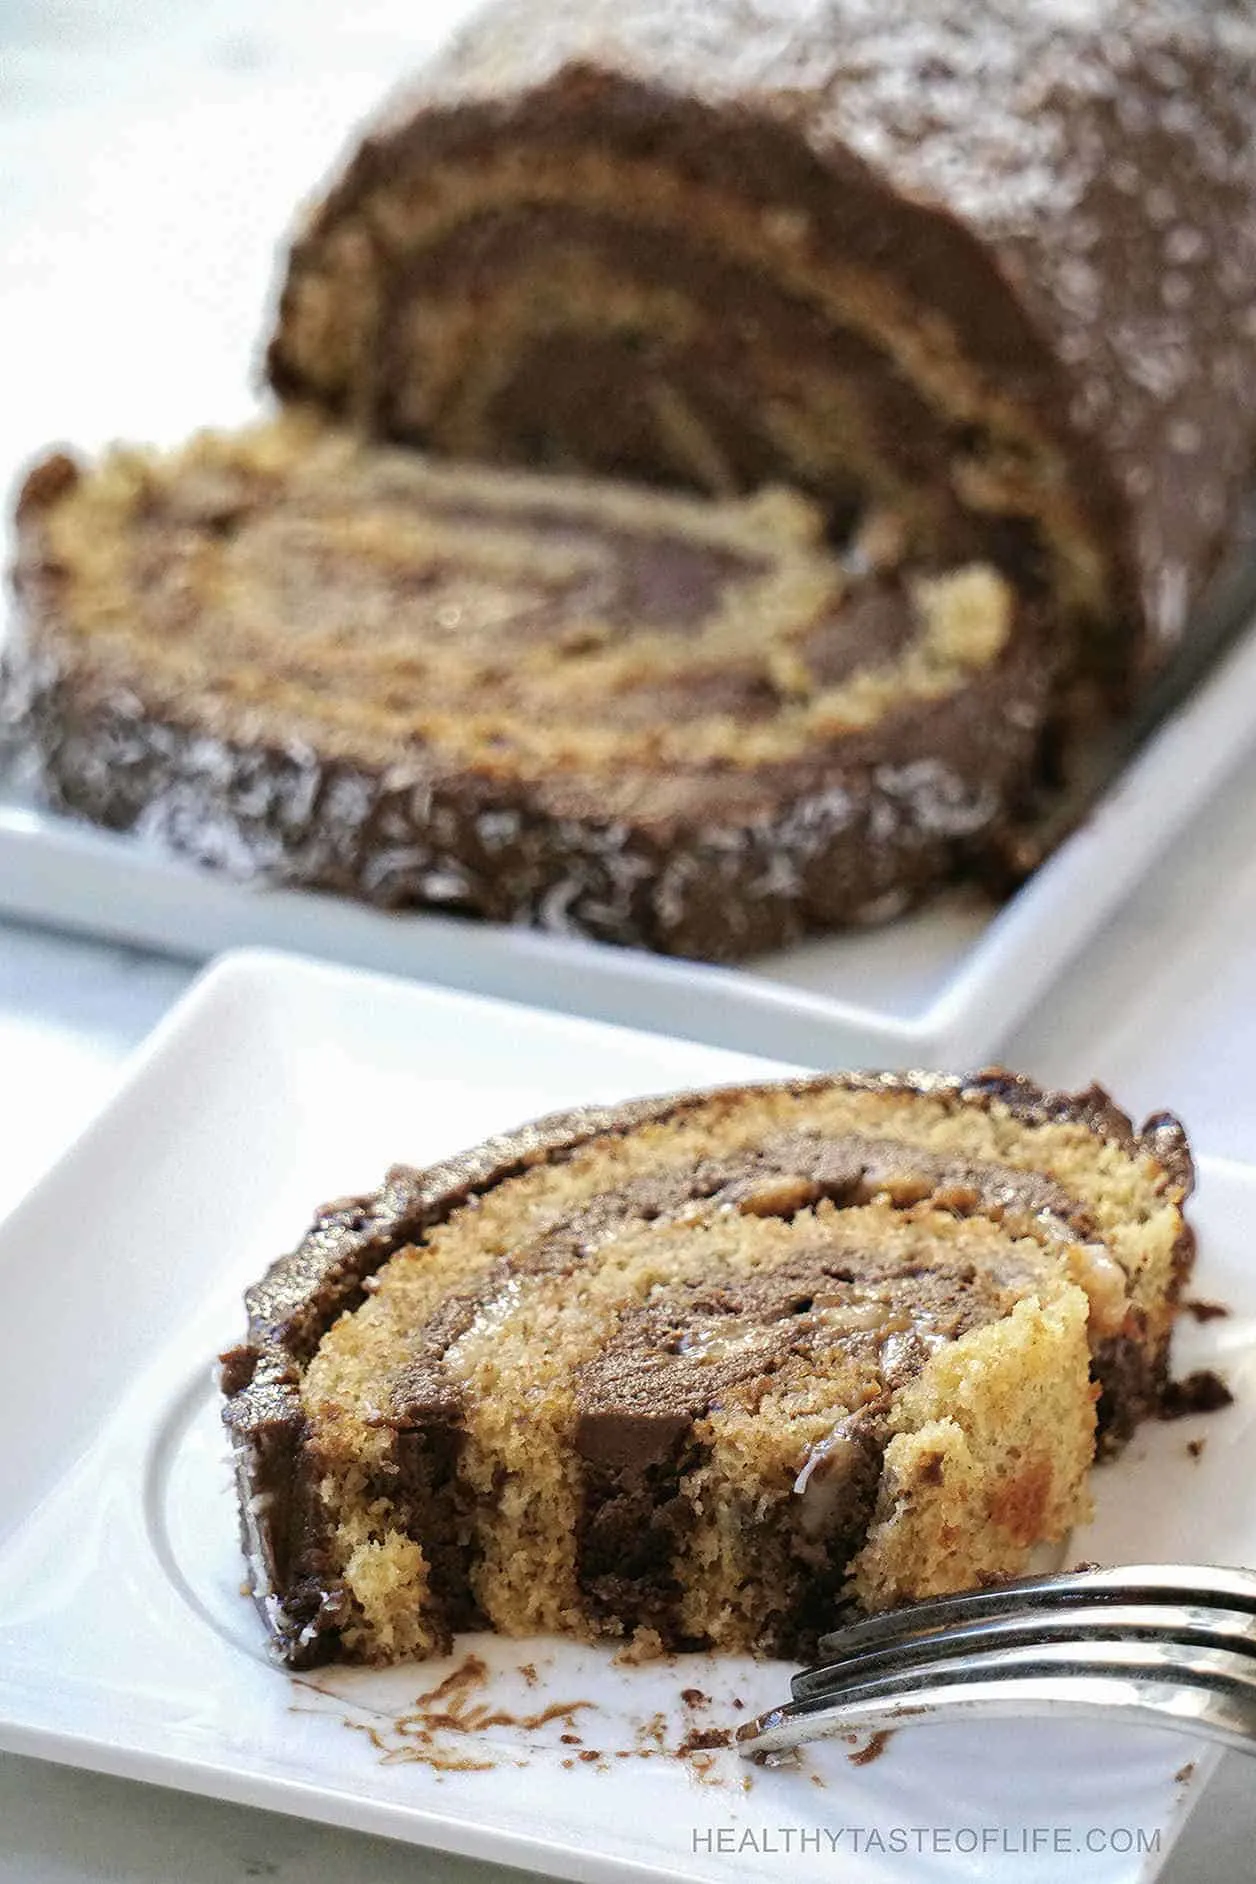 Gluten free Paleo swiss roll cake recipe with a dairy free carob frosting /filling (a chocolate substitute) enhanced with coffee flavor. This gluten free roulade cake is easy to make, it’s also grain free, refined sugar free (low sugar) and great as a paleo dessert. 